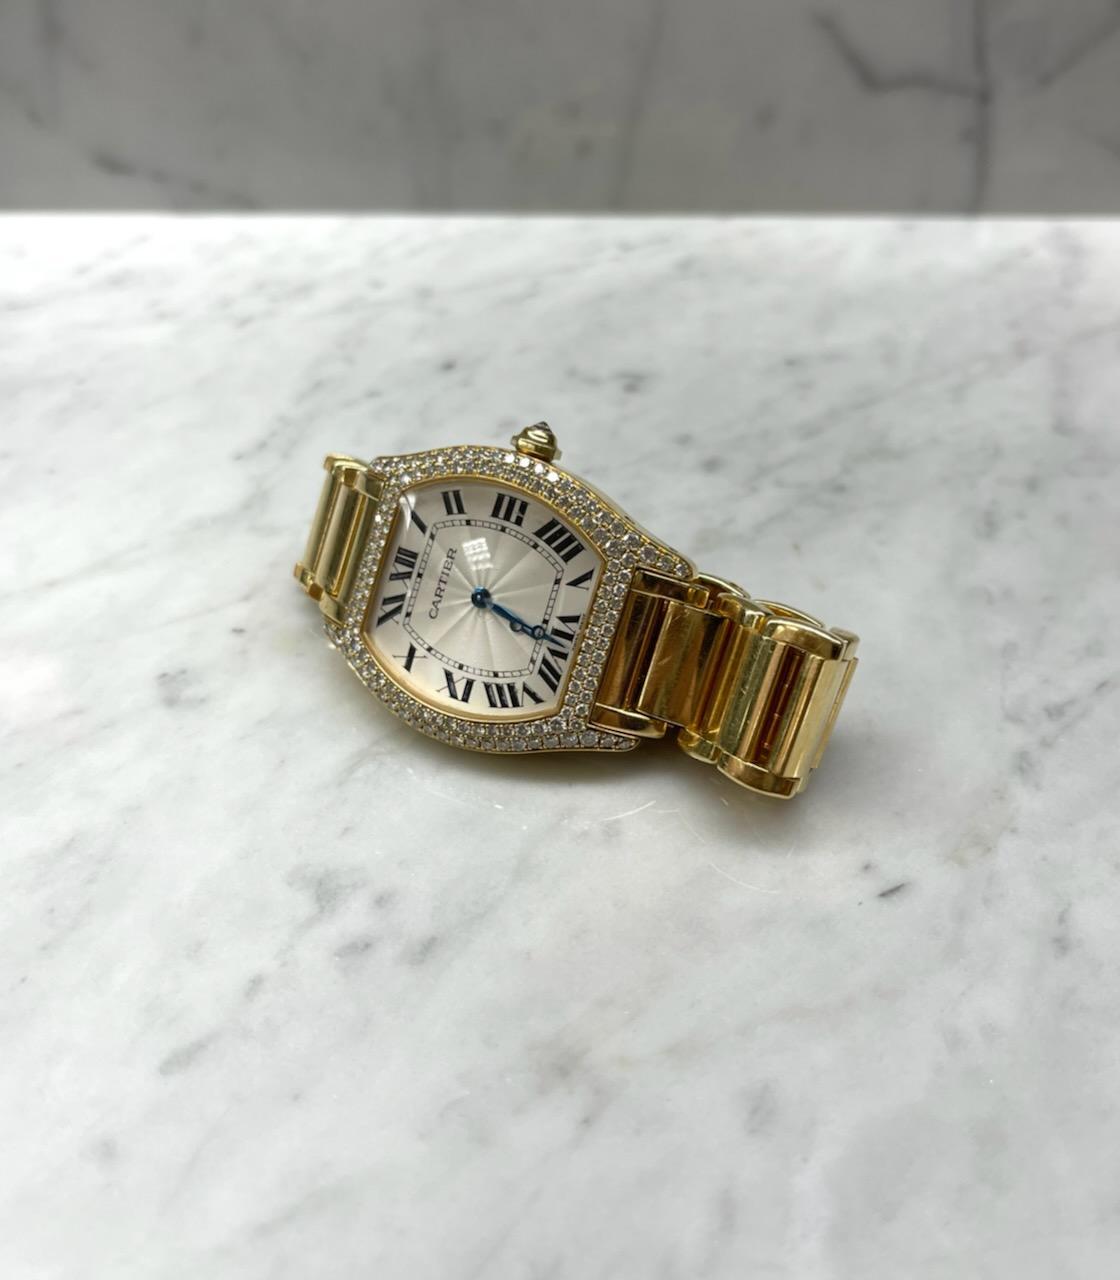 Rare opportunity to own a now discontinued Cartier
Last known retail price $59,000.00
Elegant watch, great medium size for daily wear or fancy
All factory
*Does not come with original box or papers*
*Will be cleaned, polished and serviced before